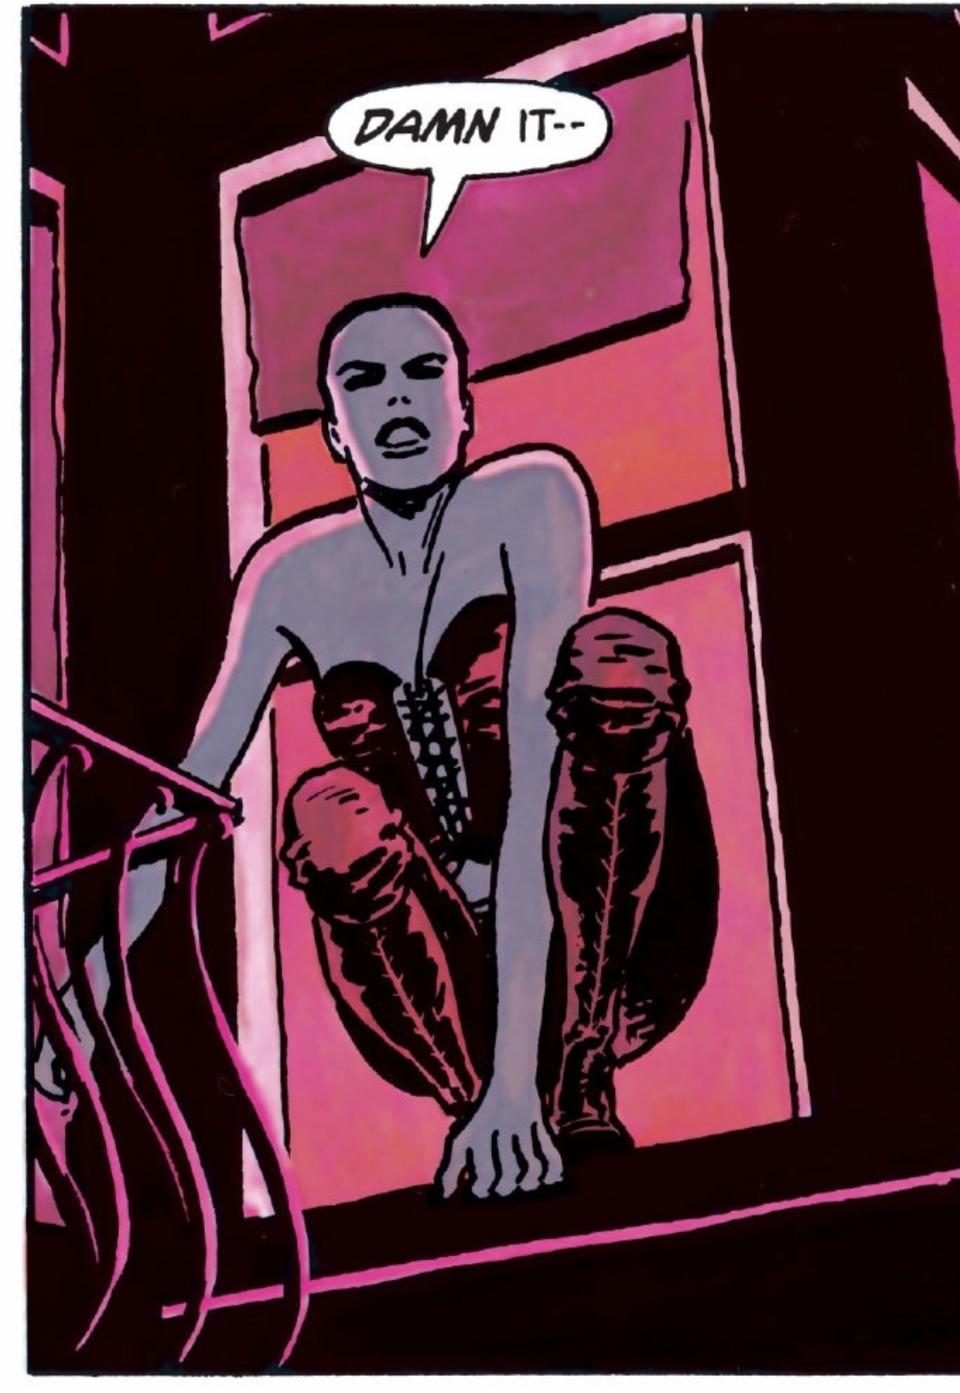 A panel from Batman: Year One by David Mazzuchelli shows Selina Kyle in leather corset and pants looking out of a window the light shining pink out of her apartment